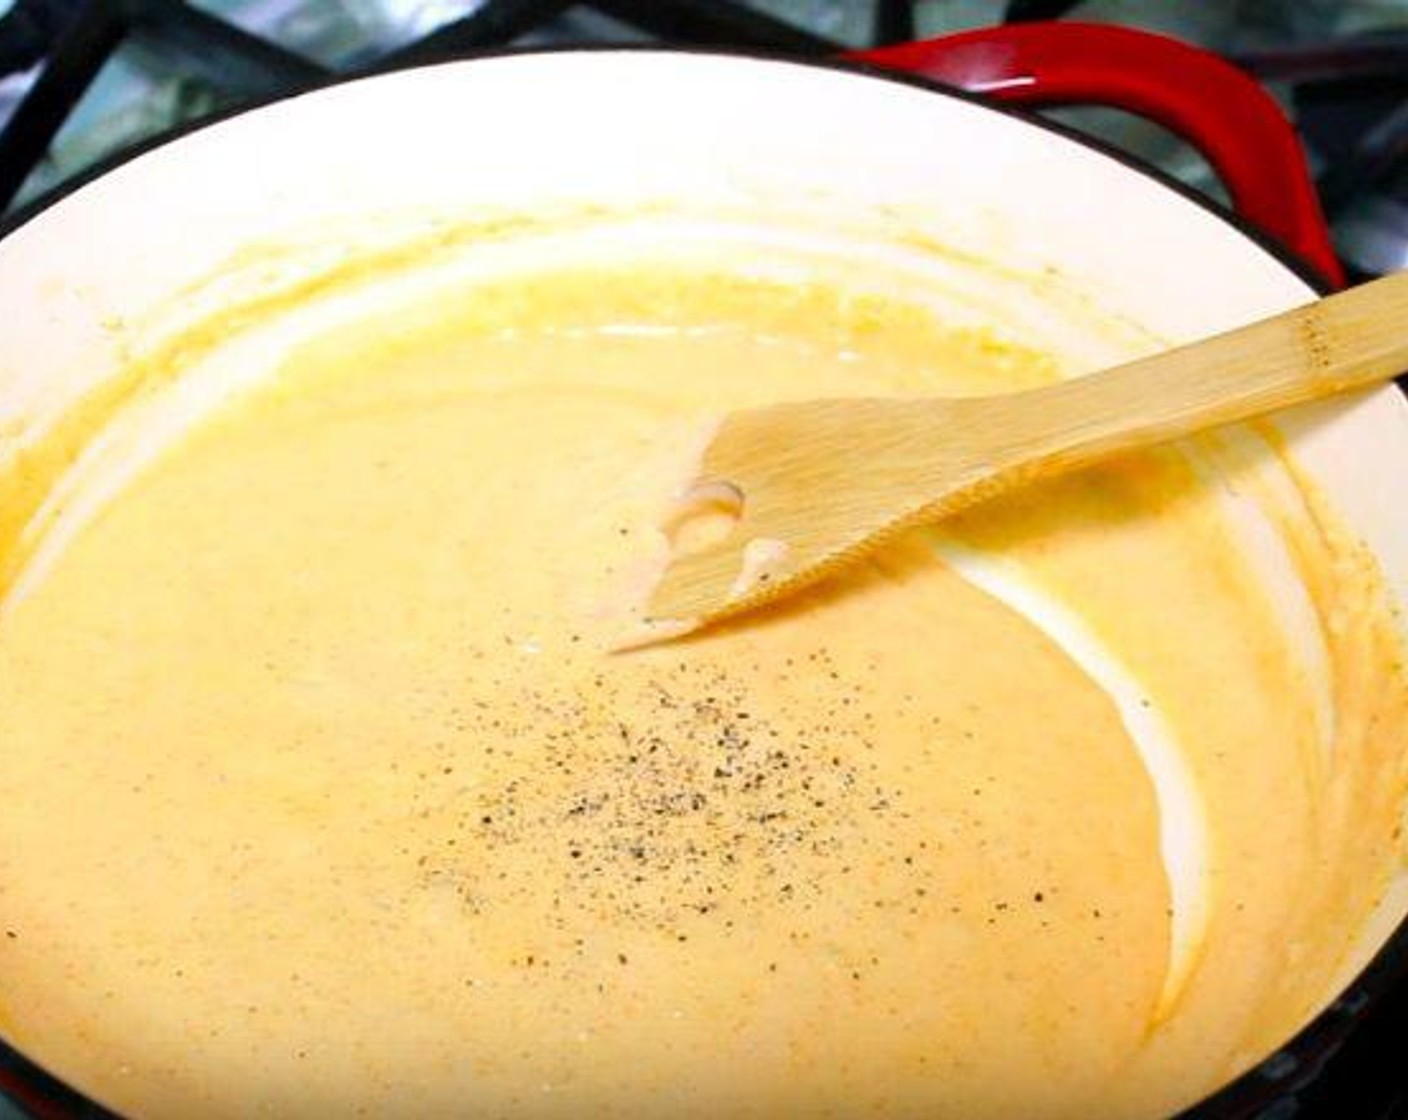 step 2 In a saucepan, melt Butter (1/4 cup). Add All-Purpose Flour (1/4 cup), whisking well. Add Whole Milk (2 1/4 cups), McCormick® Garlic Powder (1 tsp), Onion Powder (1/2 tsp), and Paprika (1/2 tsp). Stir until the mixture thickens. Season with Salt (to taste), and Ground Black Pepper (to taste).